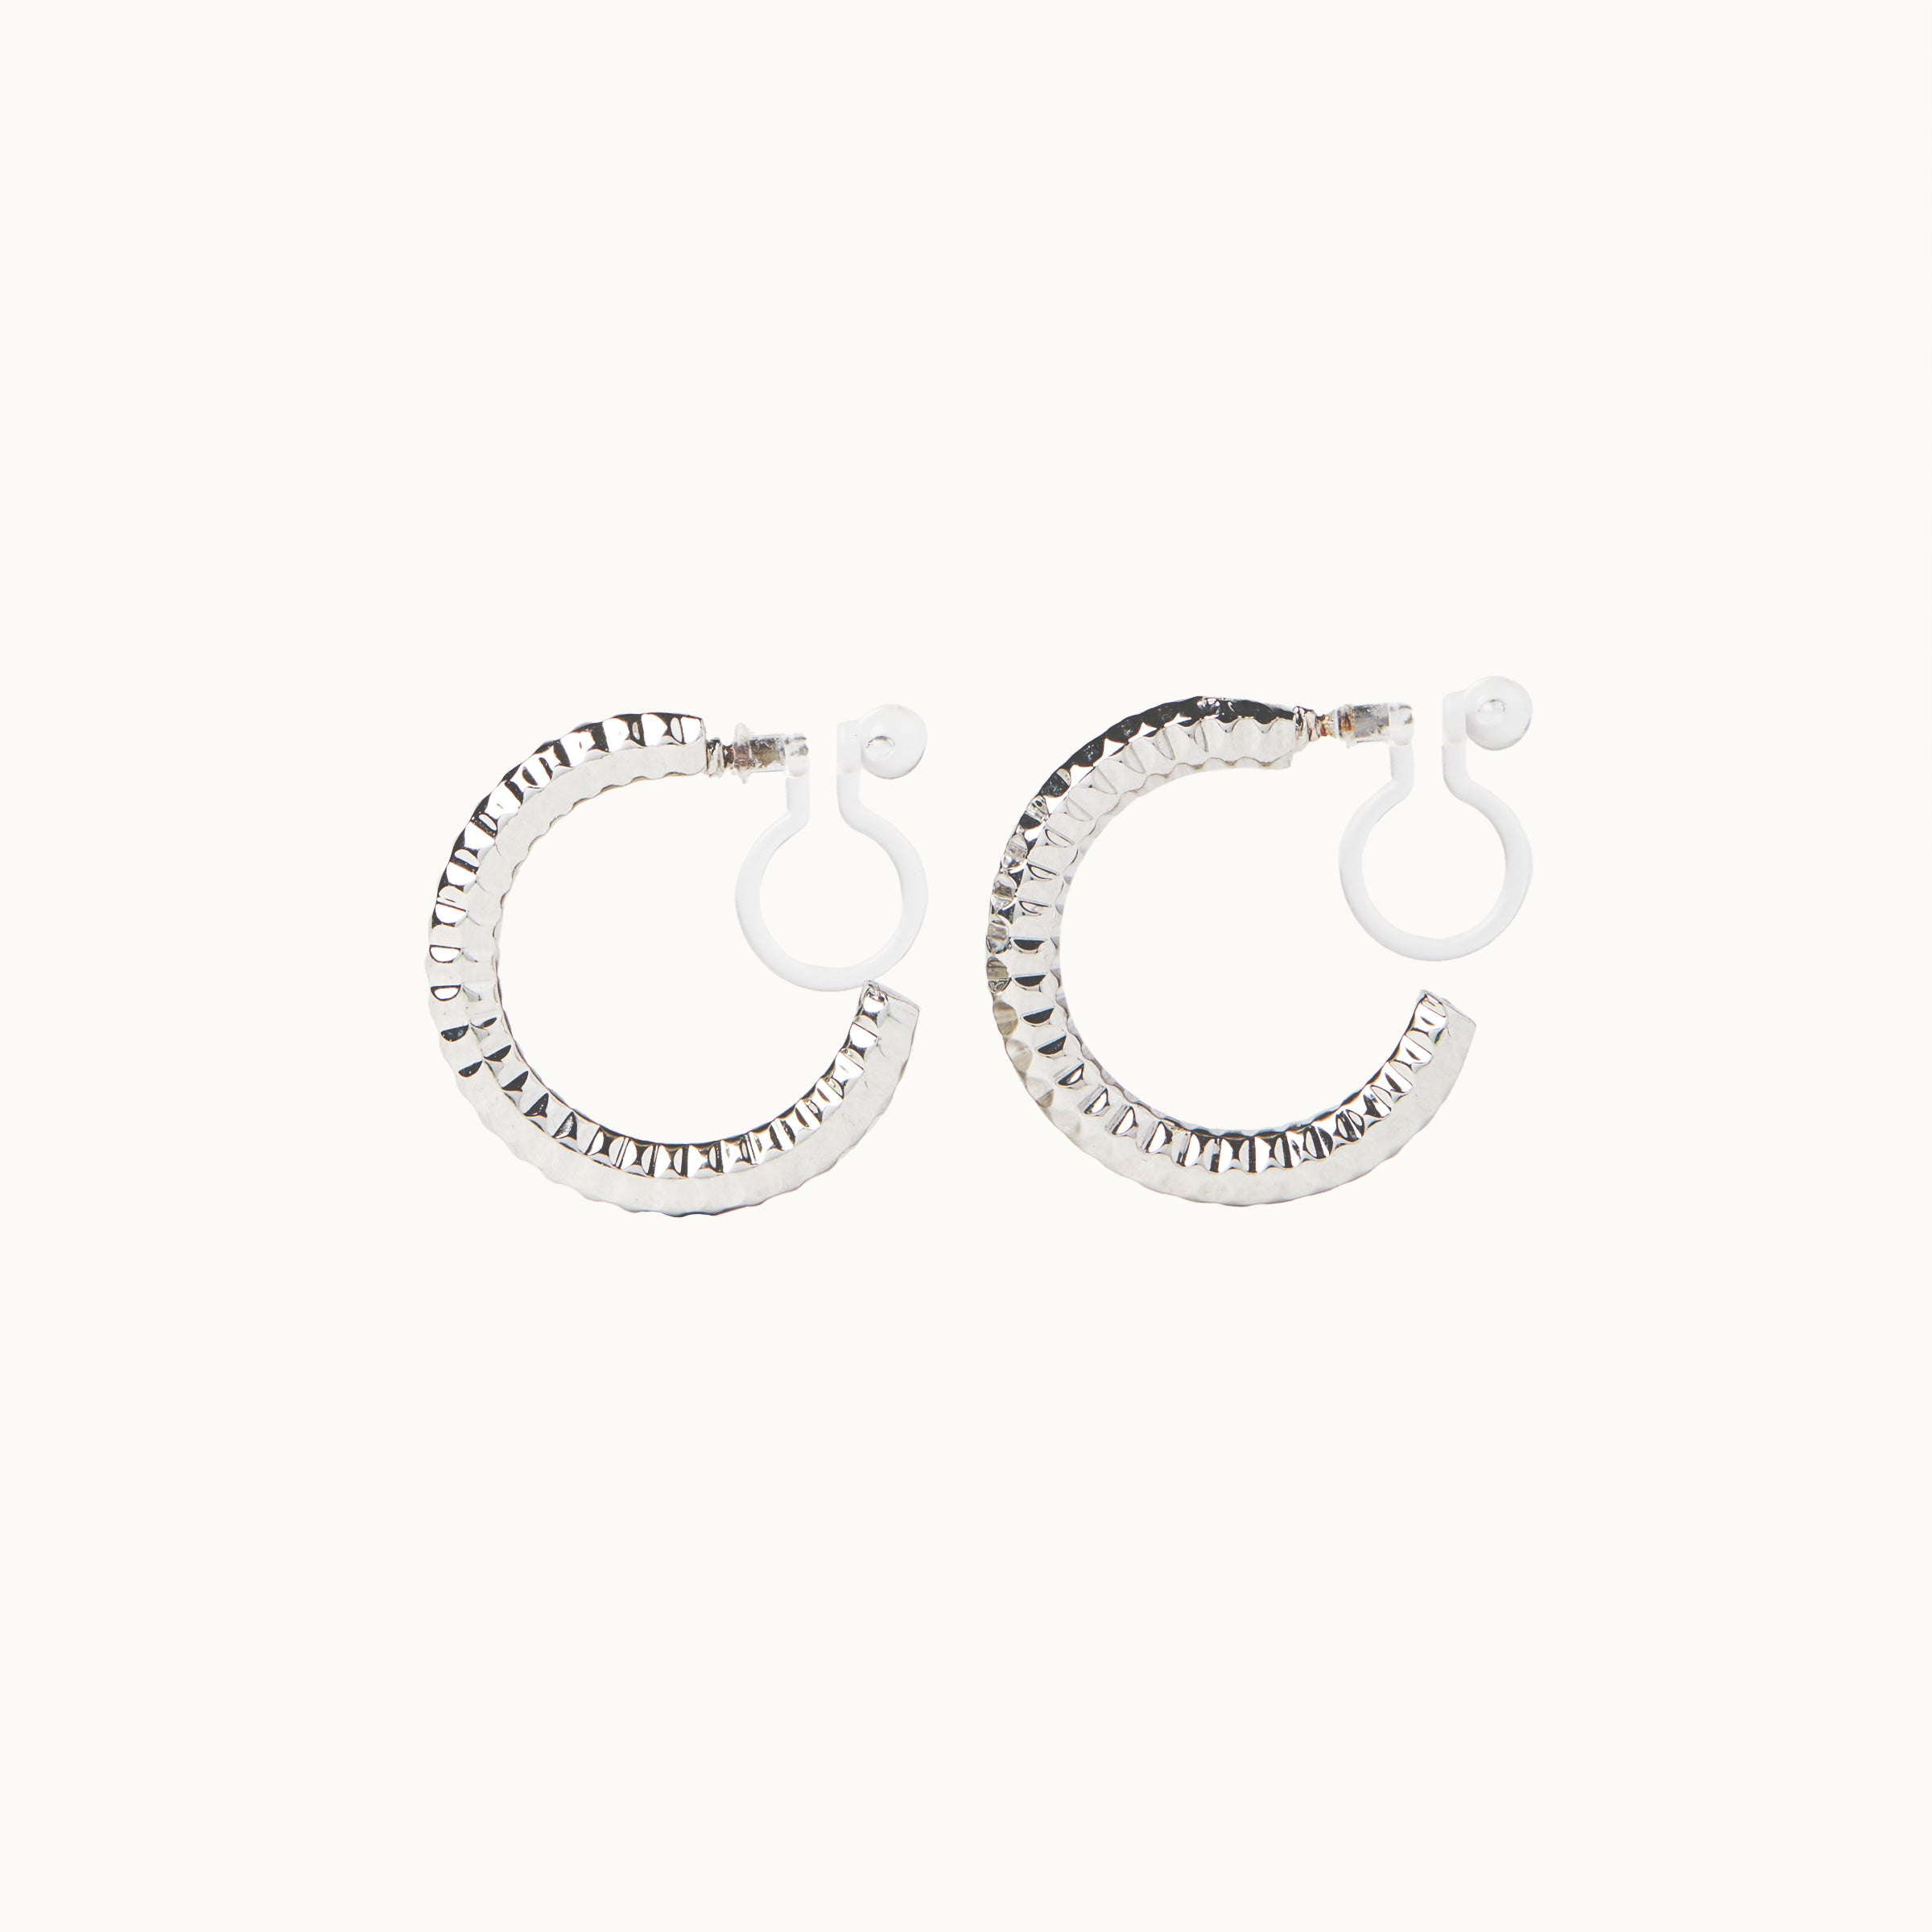 Image of the Ribbed Hoop Clip On Earrings in Silver. Made with a Resin Clip-On closure, these earrings provide a secure hold for 8-12 hours and are suitable for all ear sizes and types. Elevate your look with these versatile and long-lasting earrings. Set includes one pair.